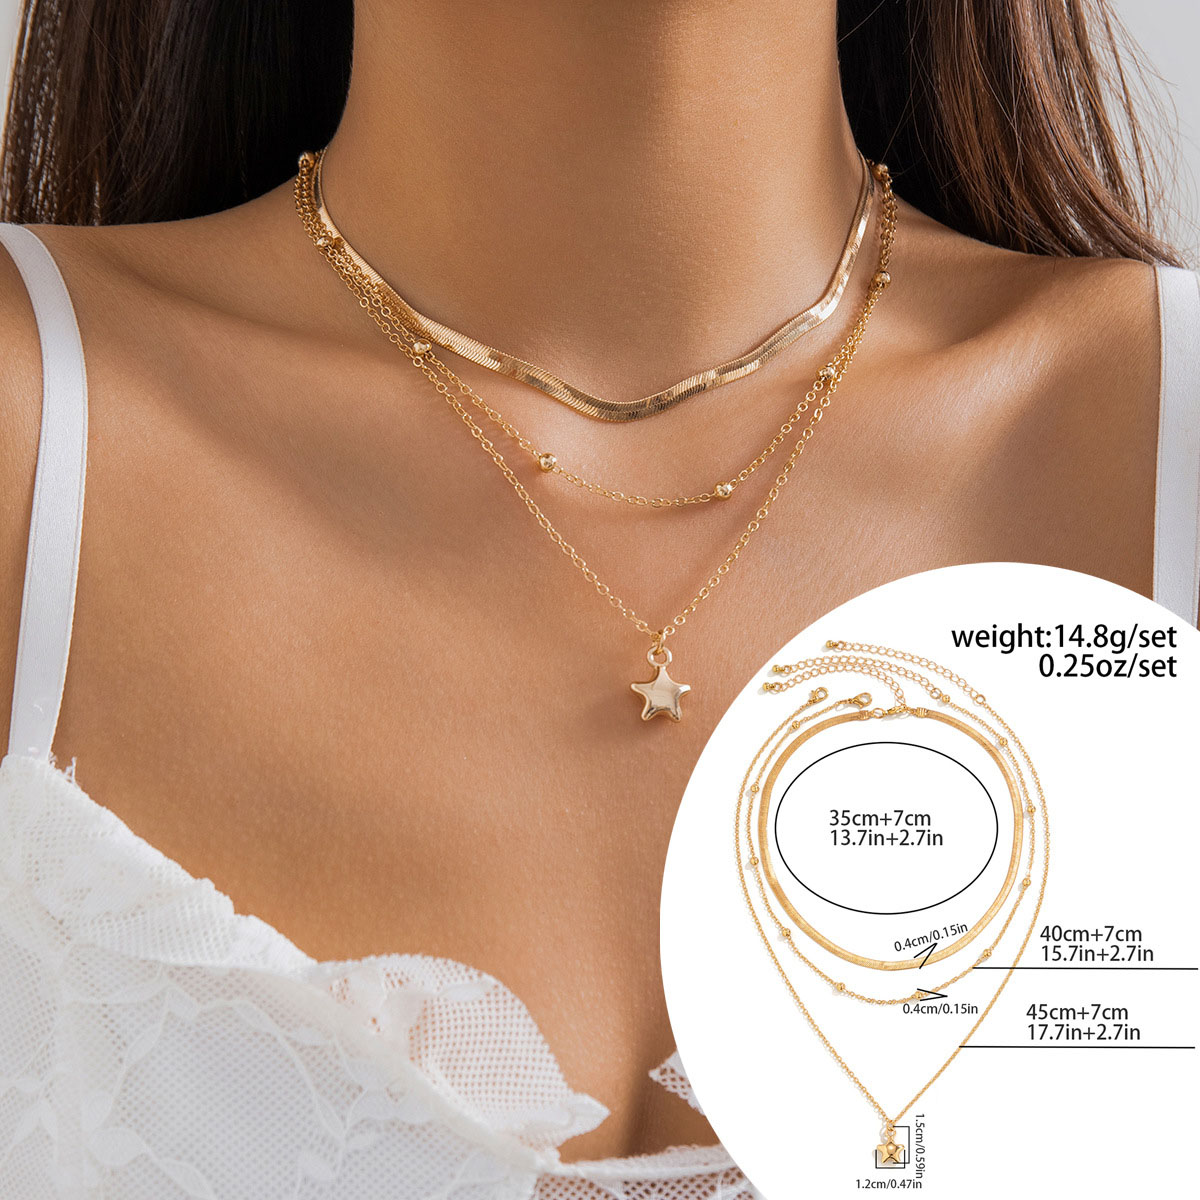 6:Necklace gold 4726